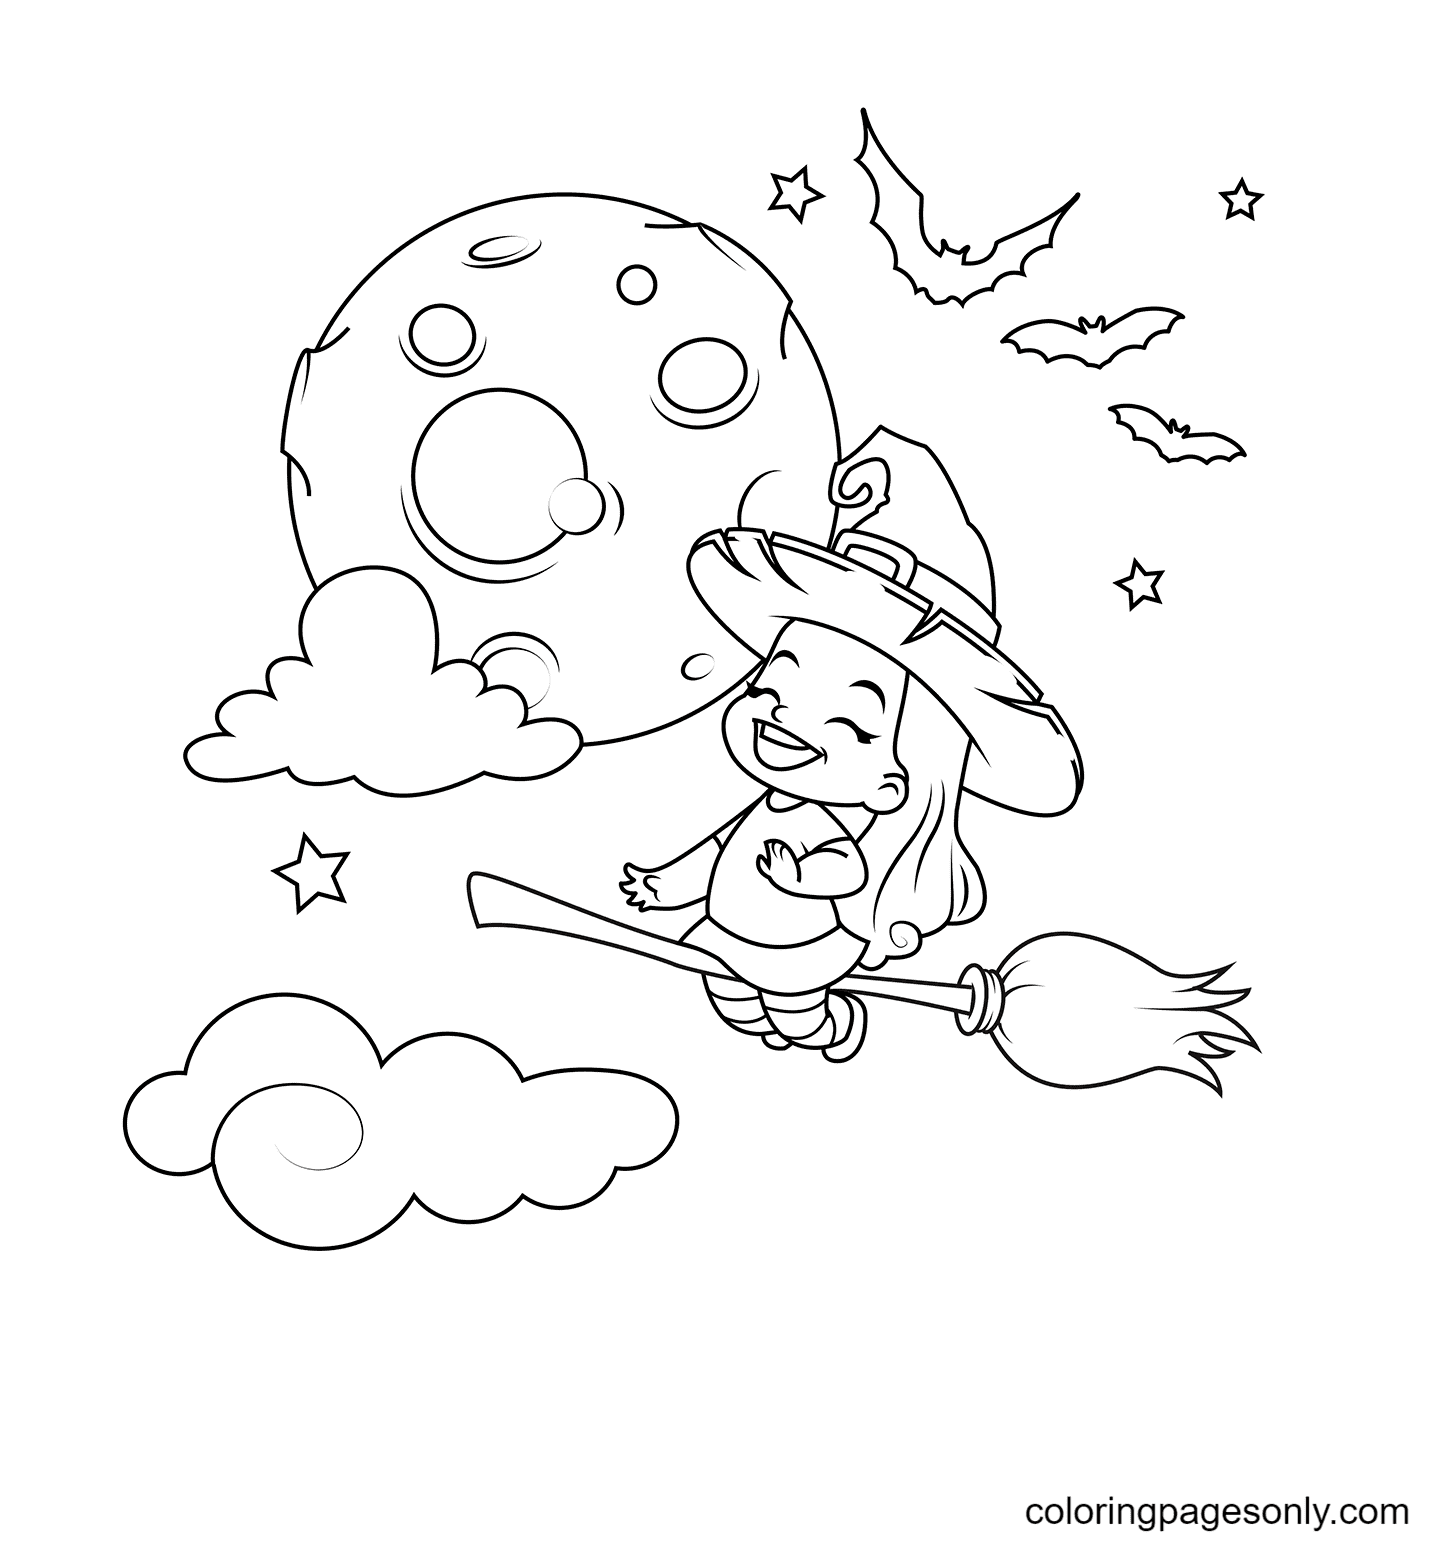 Cute Little Witch Flying on a Broomstick Coloring Page